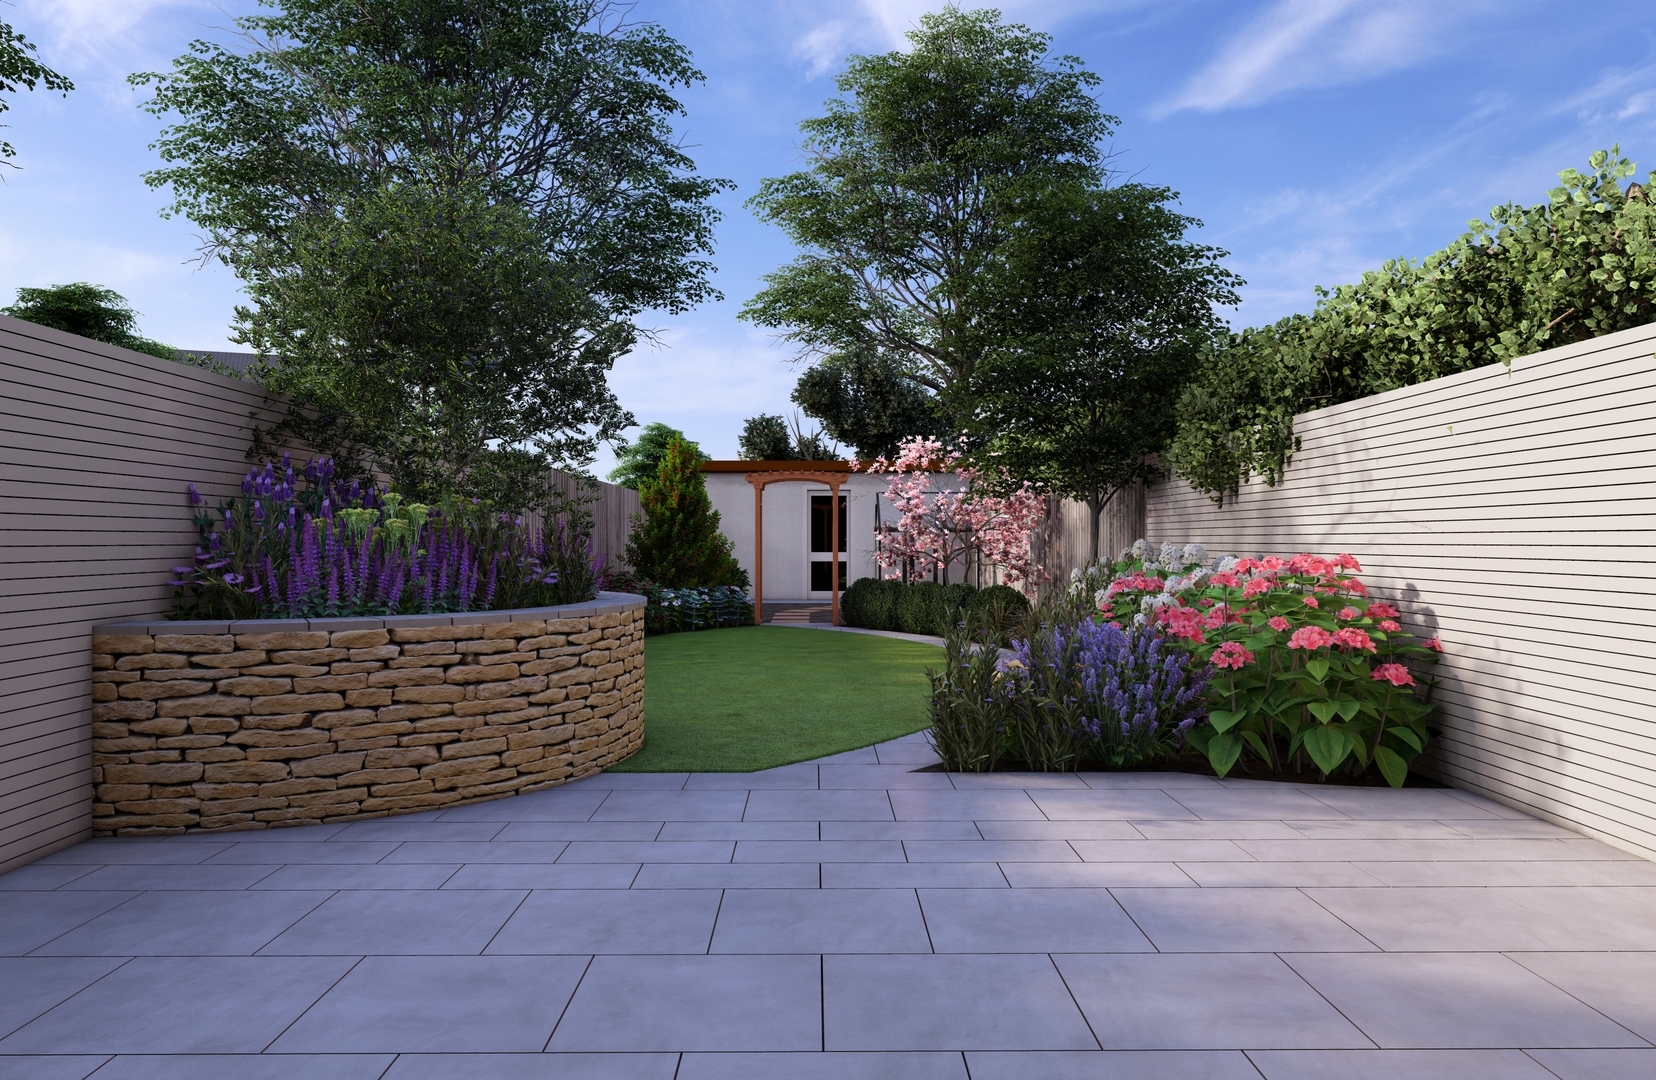 Garden Design Dublin D6W features natural limestone paving, bespoke horizontal timber slat fencing, natural drystone Raised Planter, specimen trees and colourful perennial planted borders.